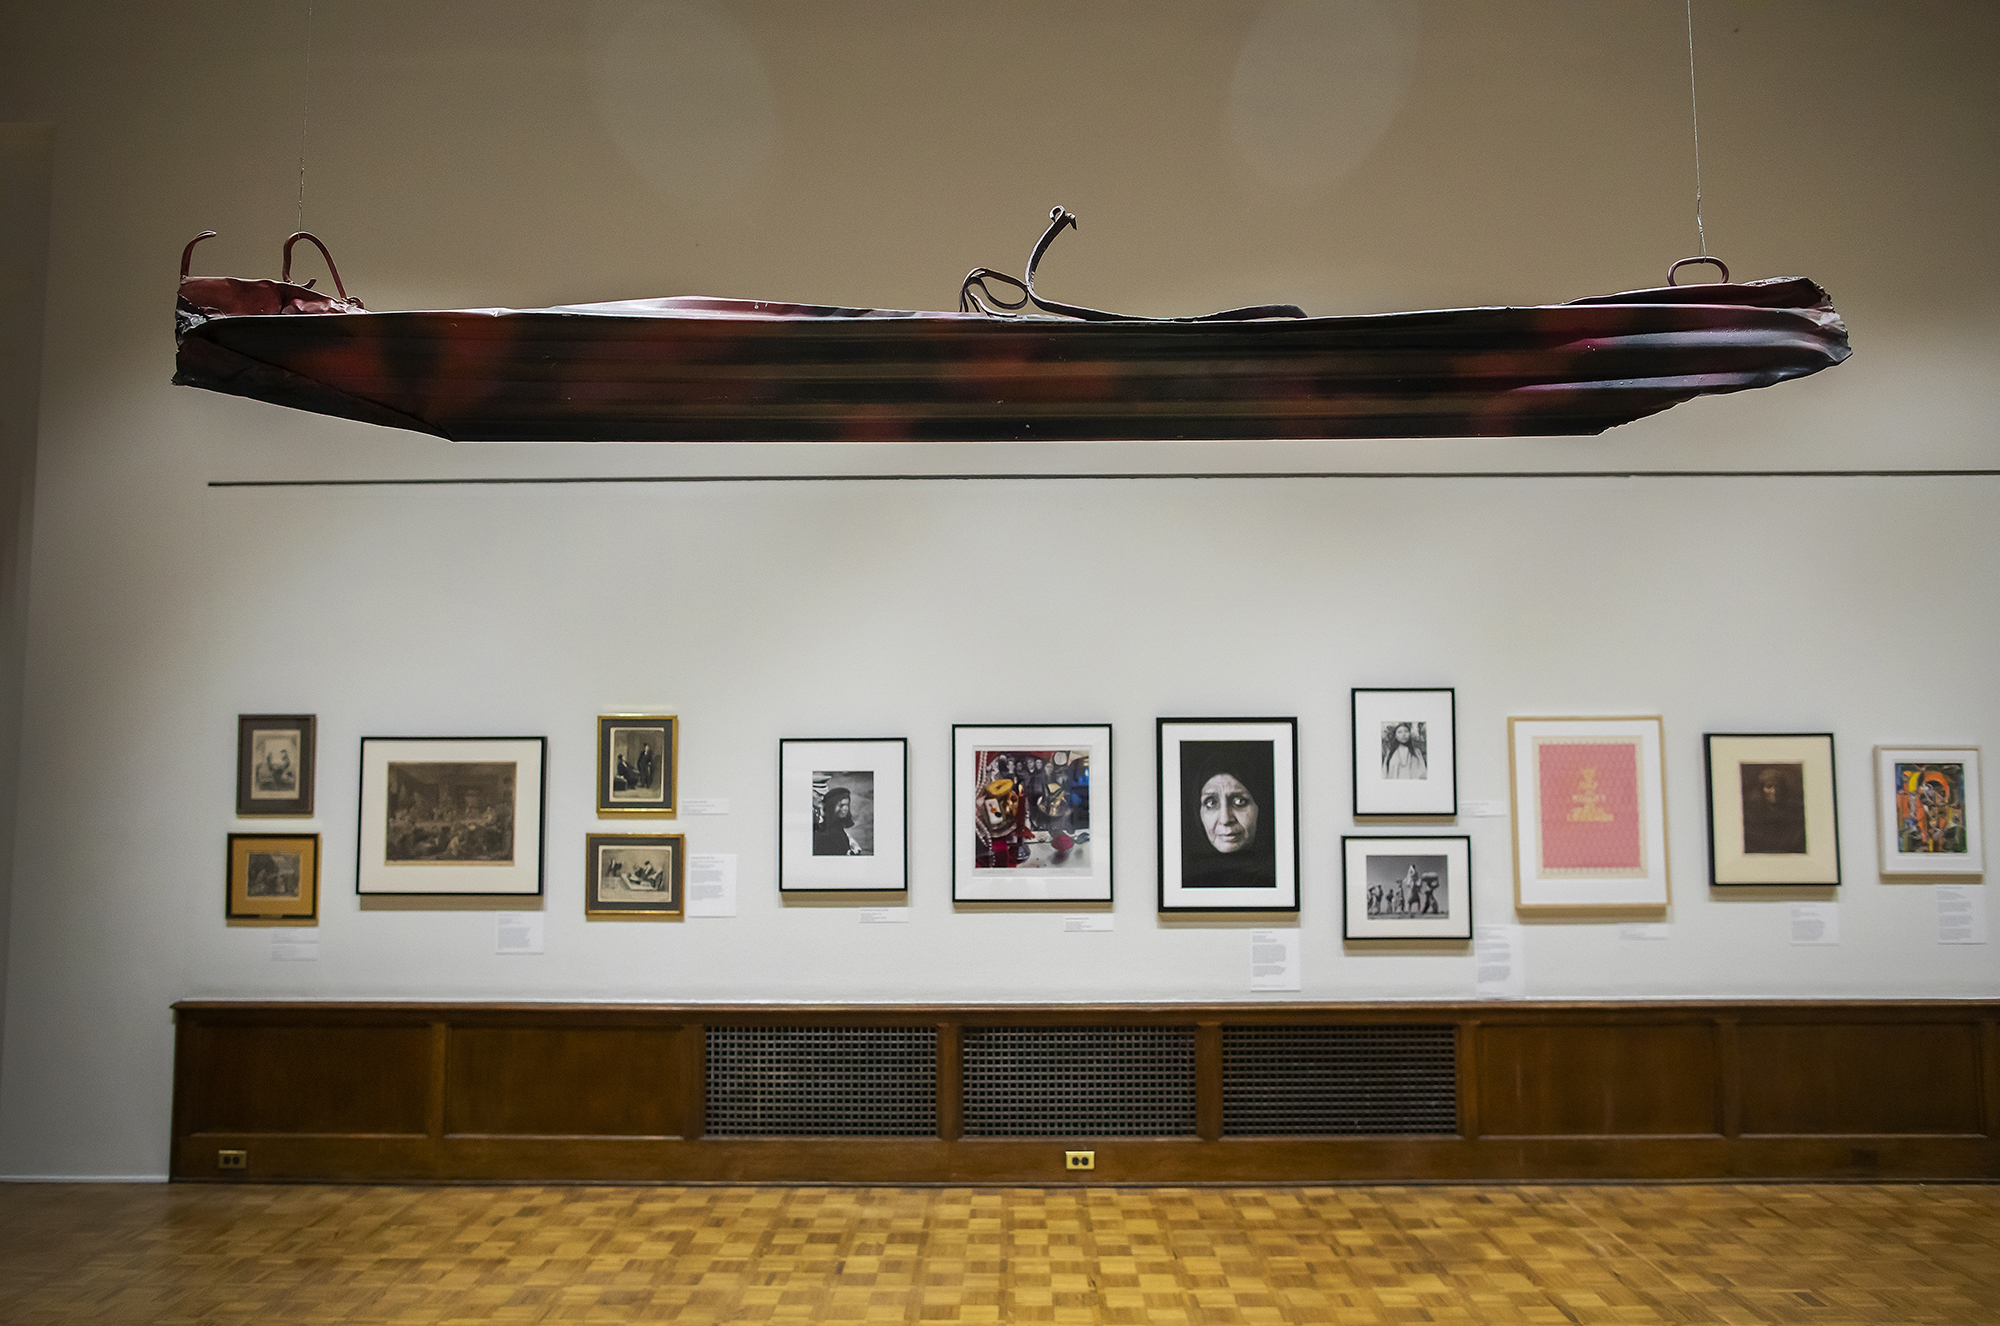 A metal kayak hangs from the ceiling in an art gallery with several artworks on the wall.